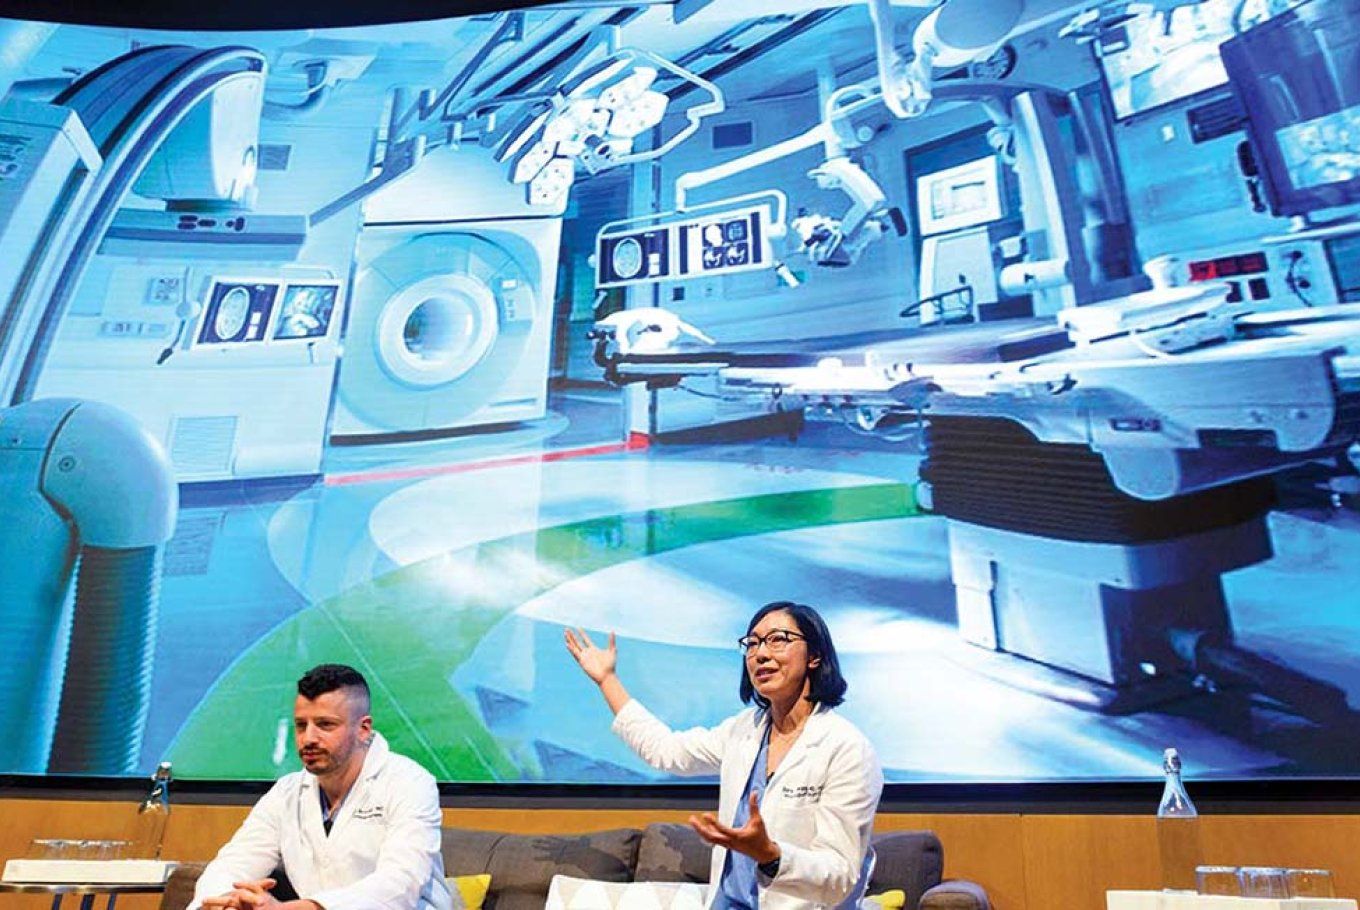 Two surgeons sit in front of a large screen, presenting an operating room of the future.